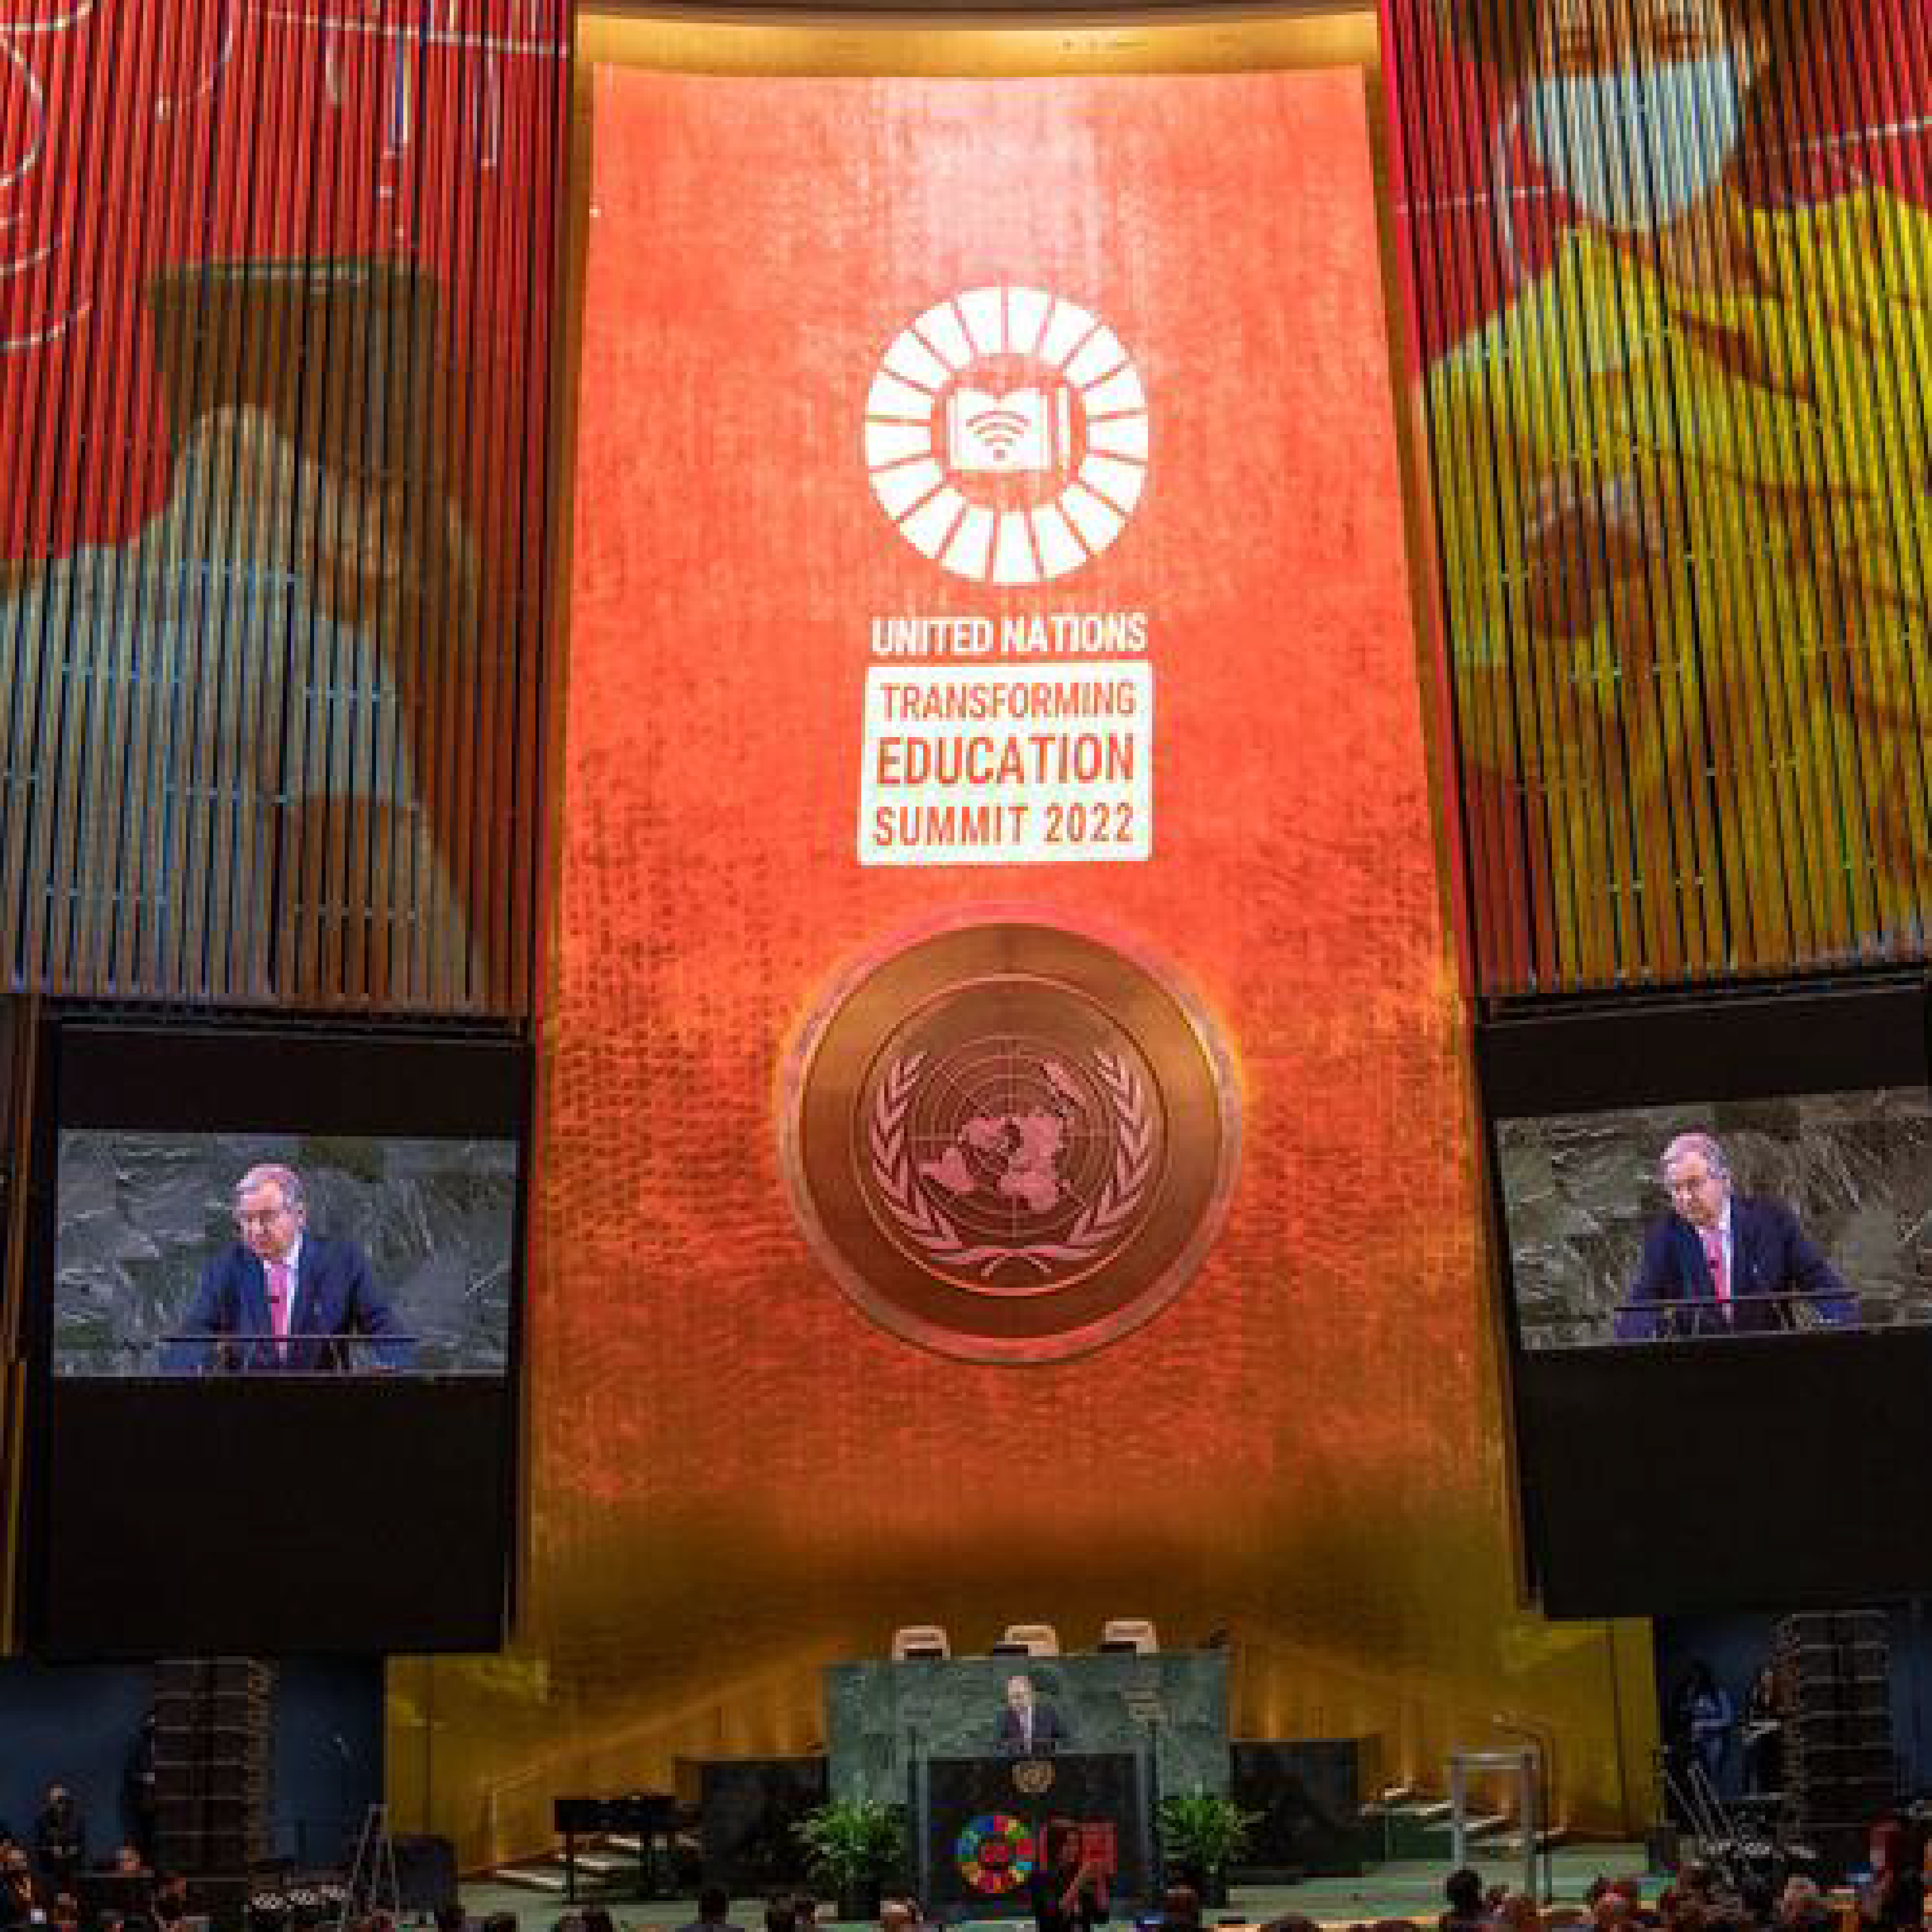 Before speaking at the UN Transforming Global Education Summit, Secretary-General António Guterres addresses the SDG Moment in the General Assembly Hall.